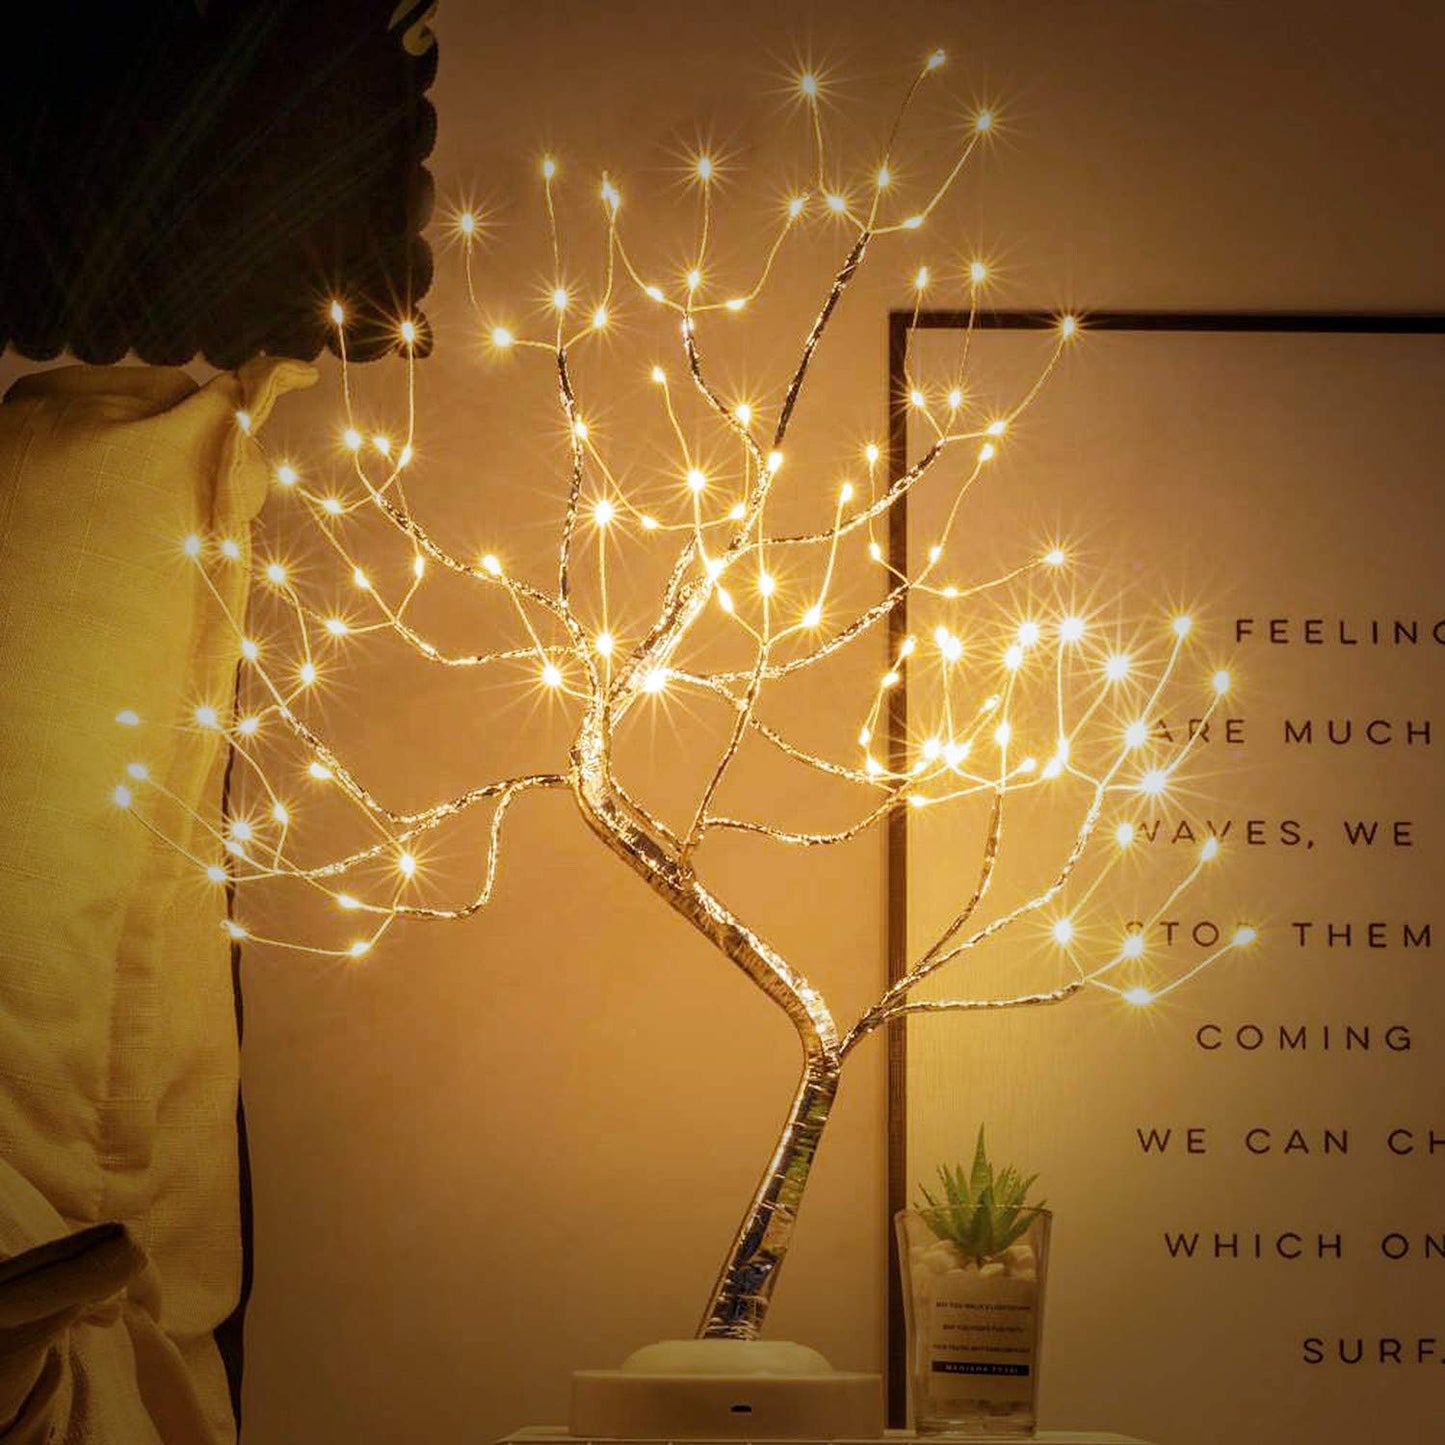 LED Birch Tree Lights Artificial Tabletop Fairy Tree Lamp Eight Lighting Modes USB or Battery Operated with Timer Decor for Bedroom Living Room Wedding Christmas Easter